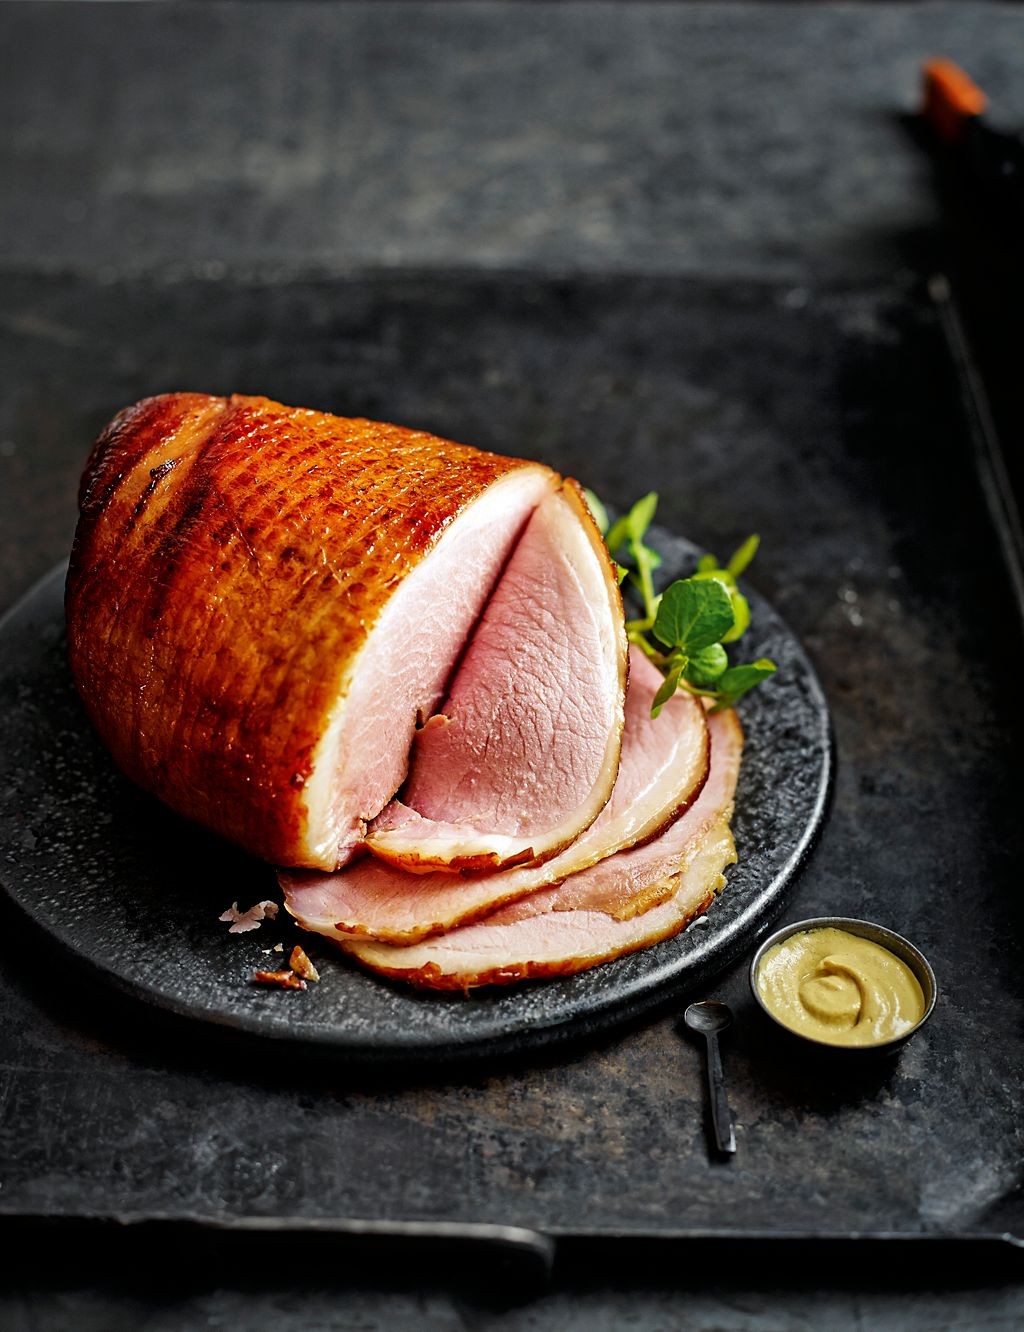 Dry Cured Sugar Baked Gammon Joint 1 of 2